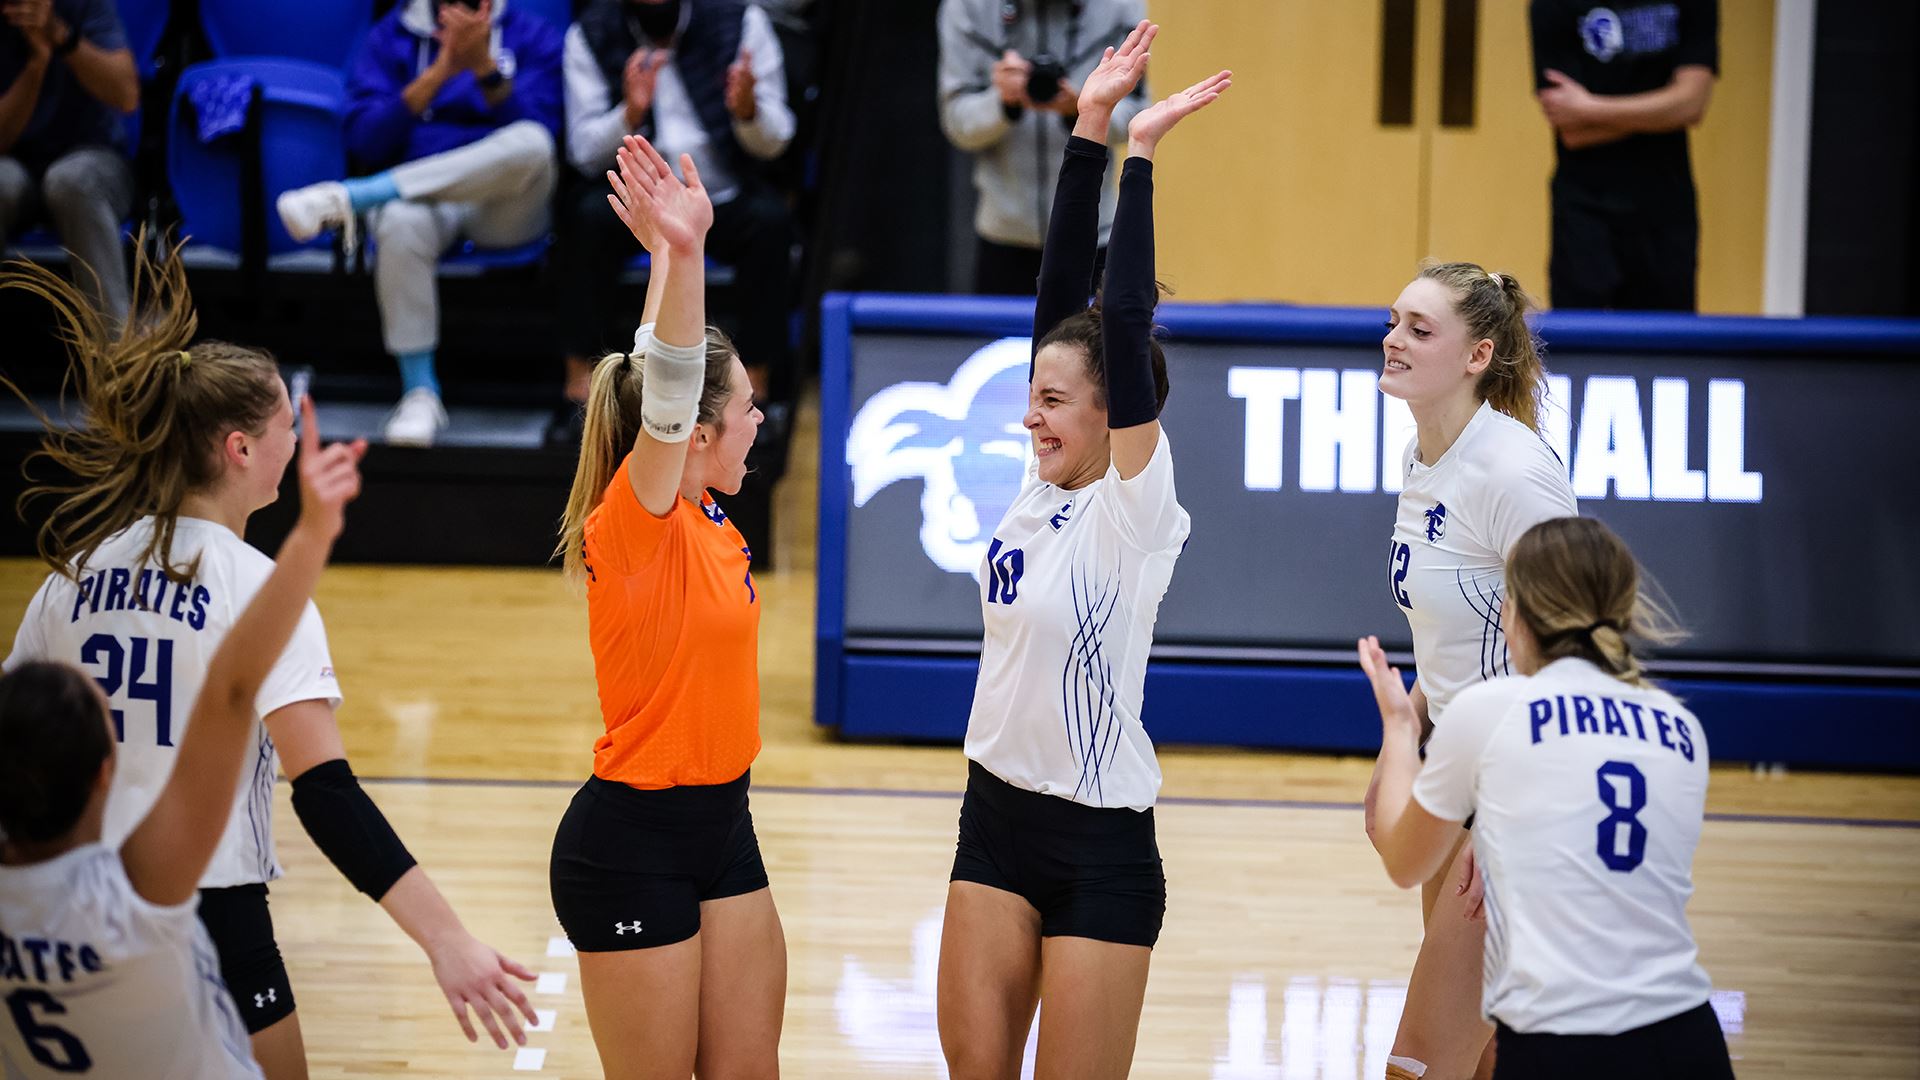 The Seton Hall women's volleyball team celebrates after winning a home match against Xavier.